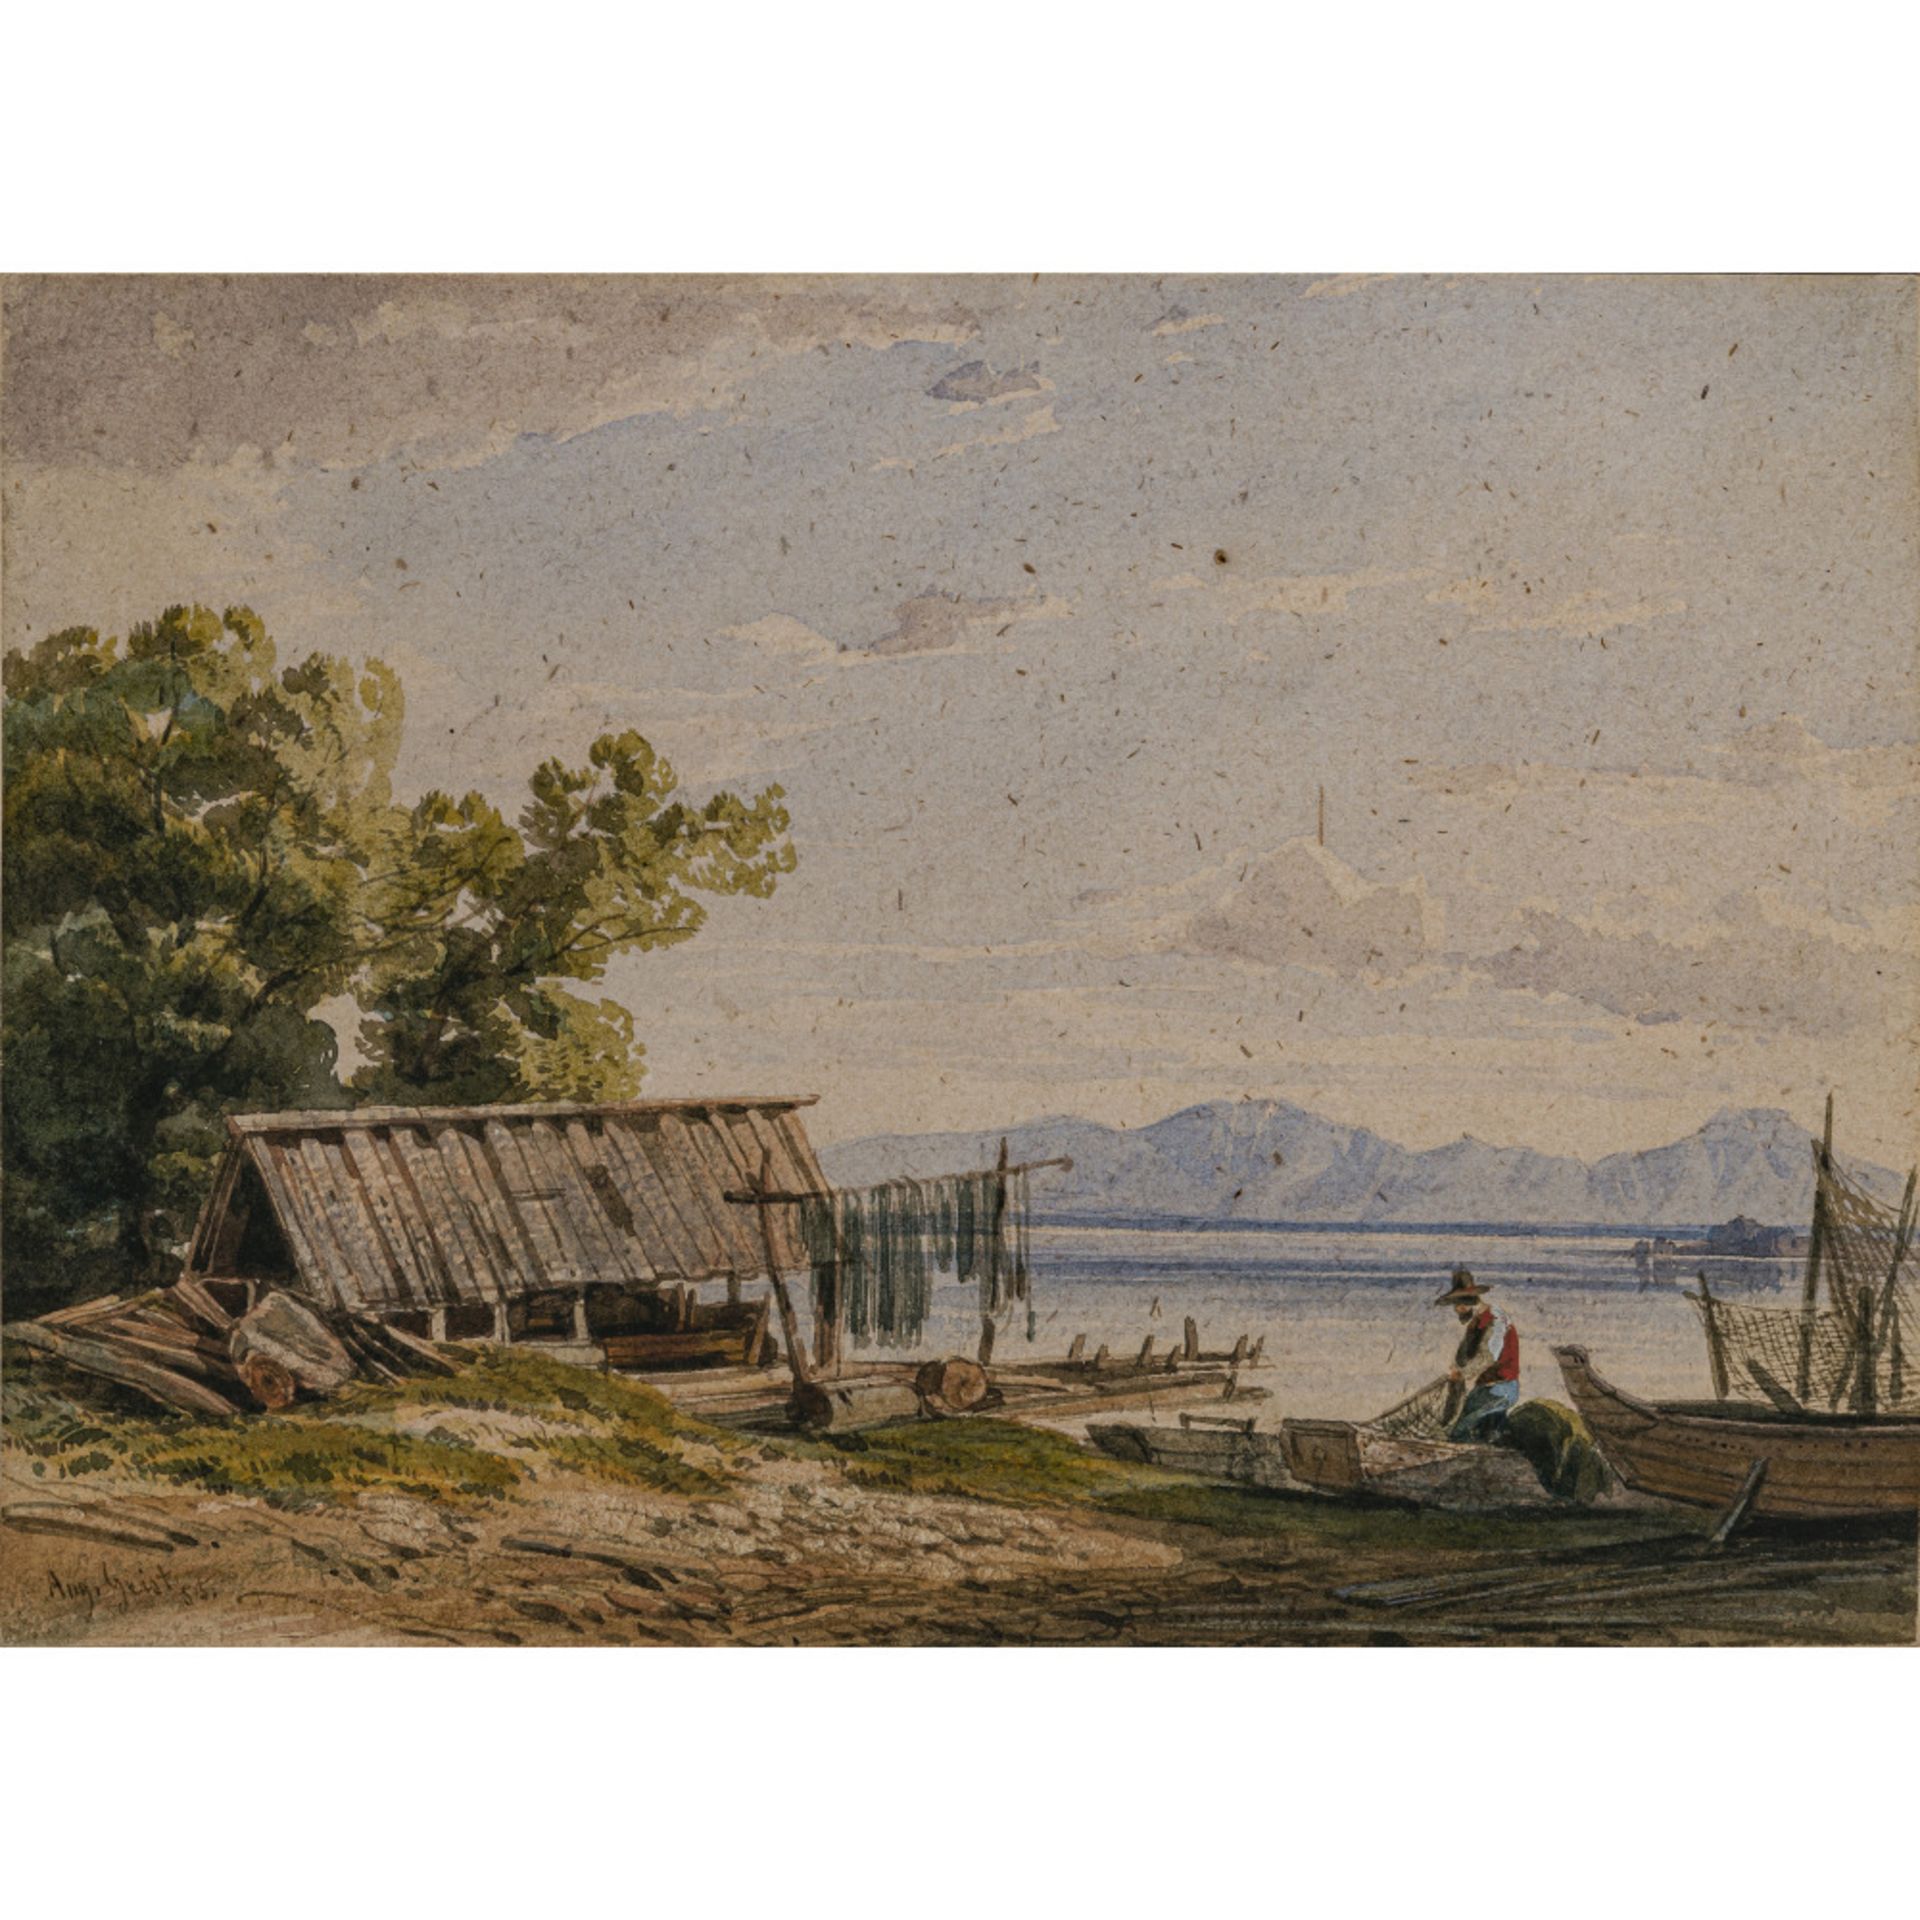 August Christian Geist - Fisherman on the banks of Lake Chiemsee